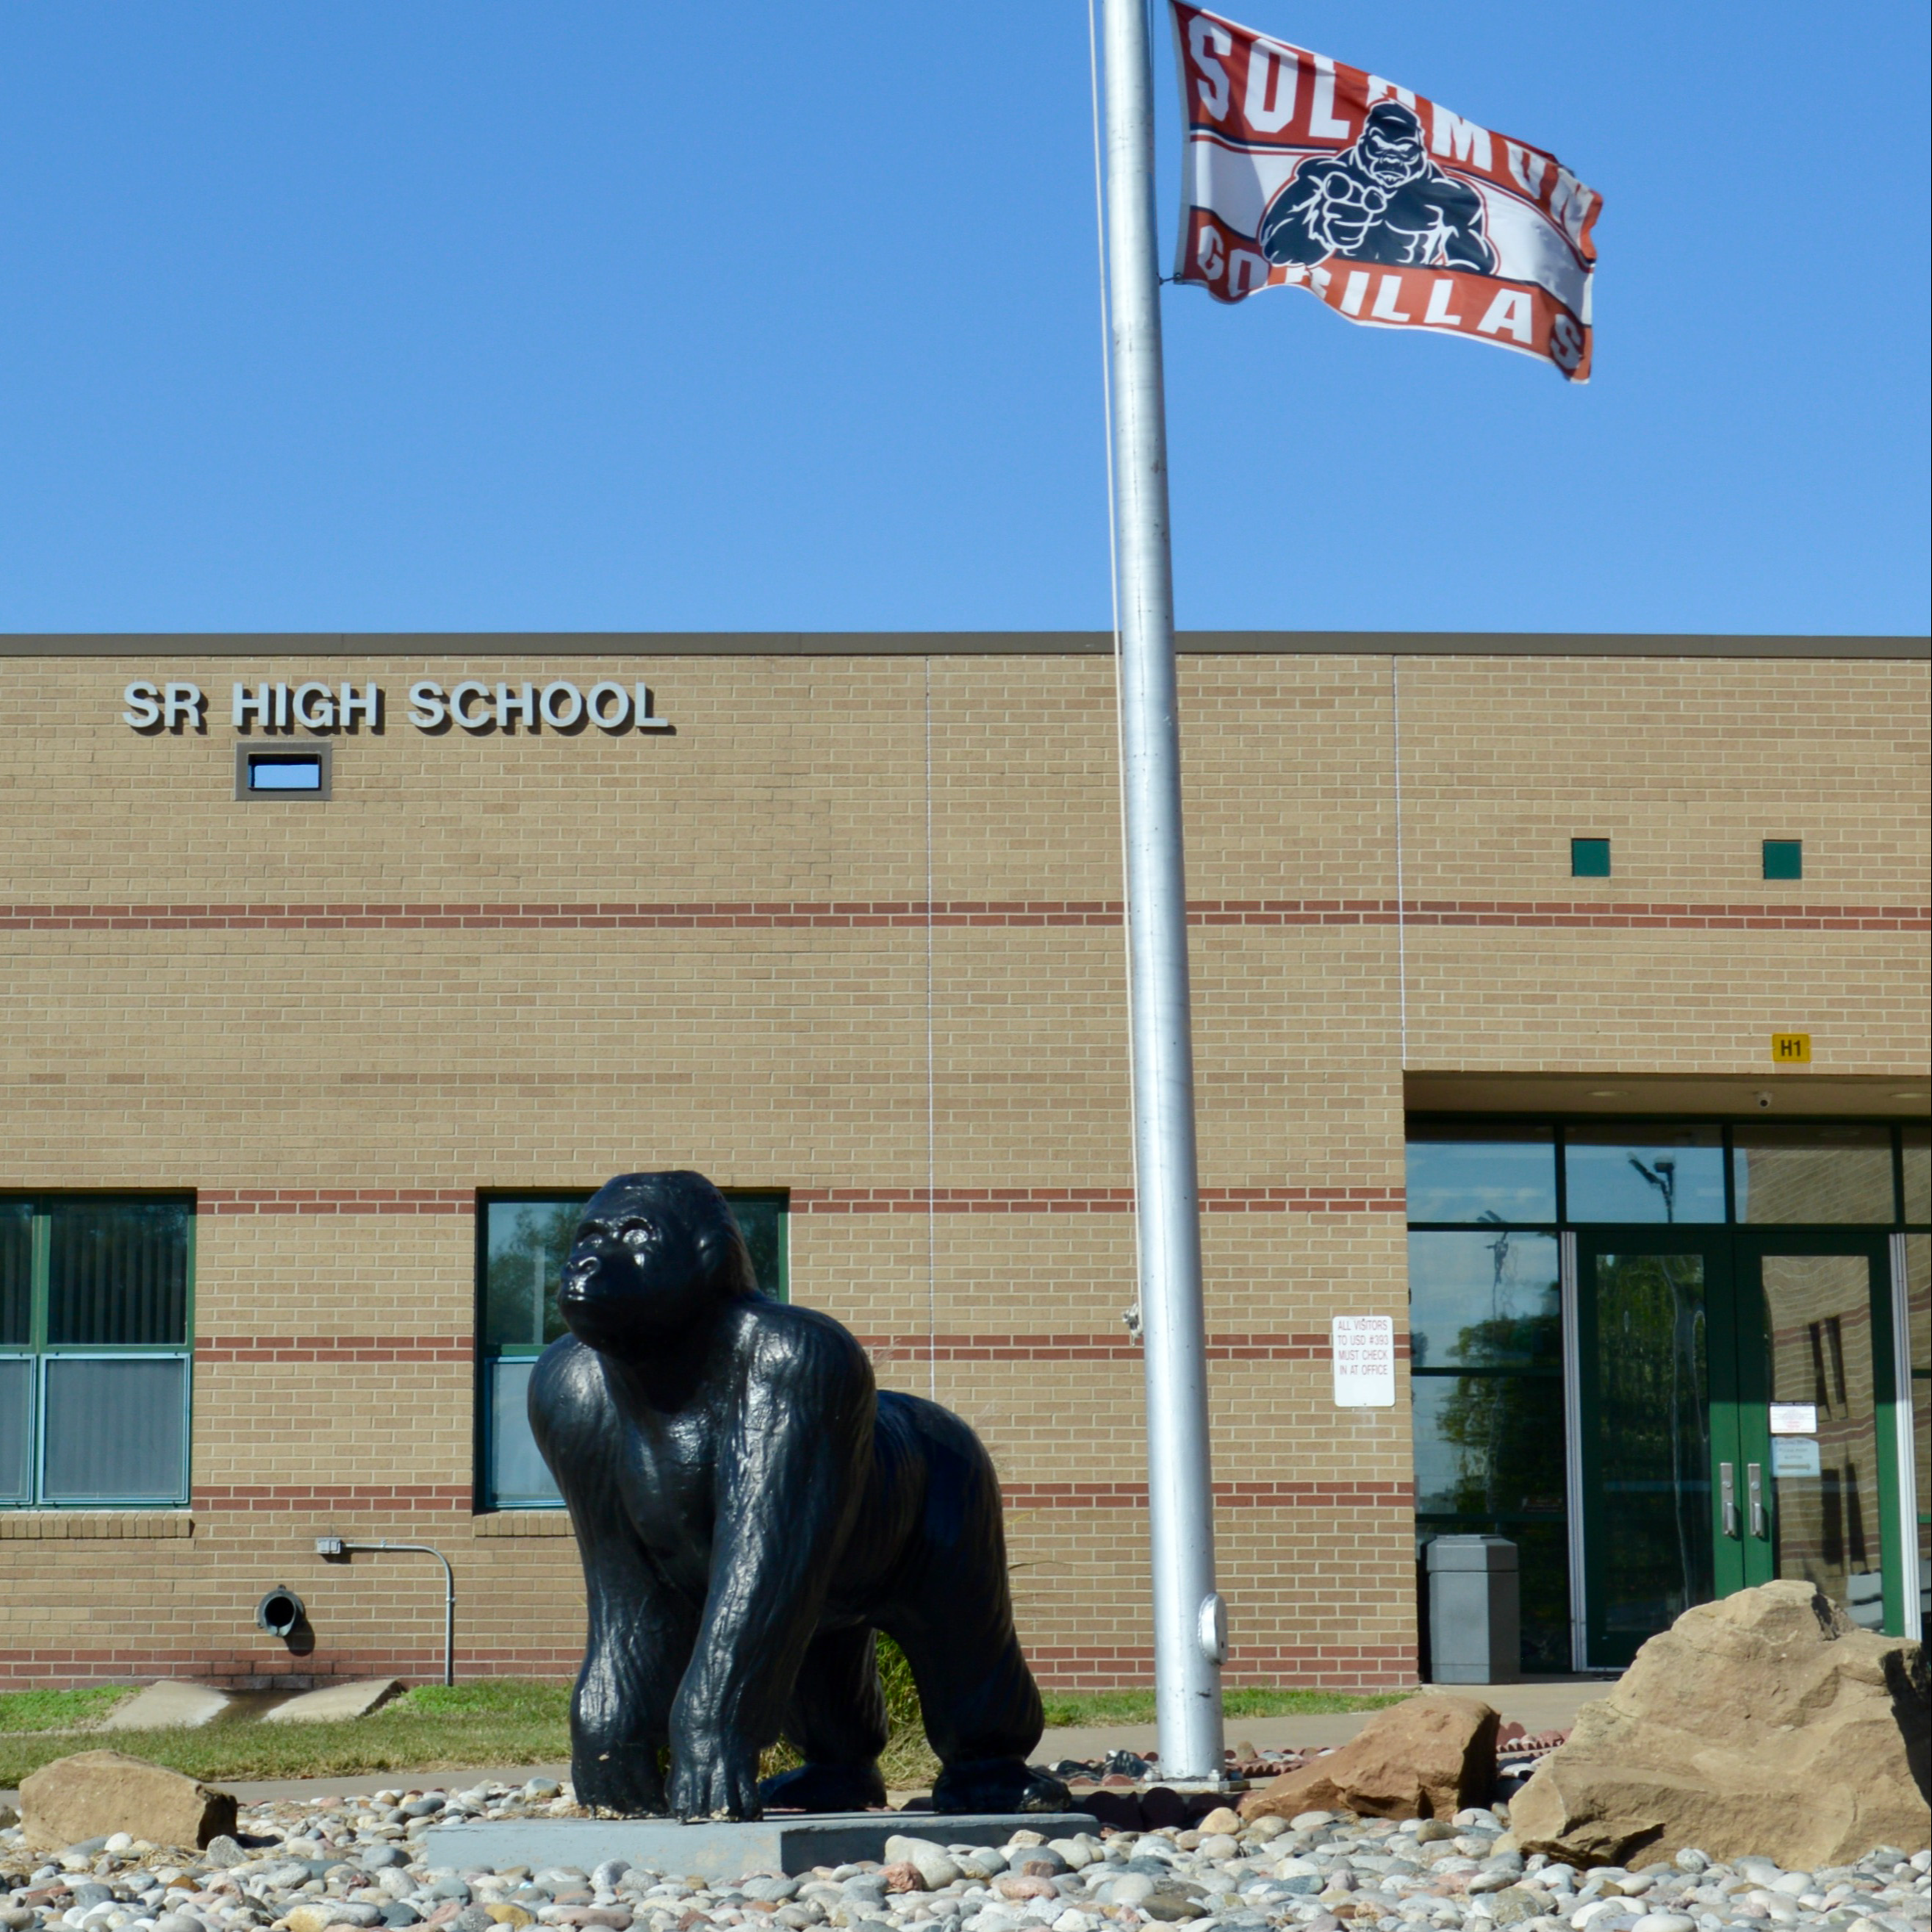 A photo of the front of the school and a statue of the gorilla school mascot